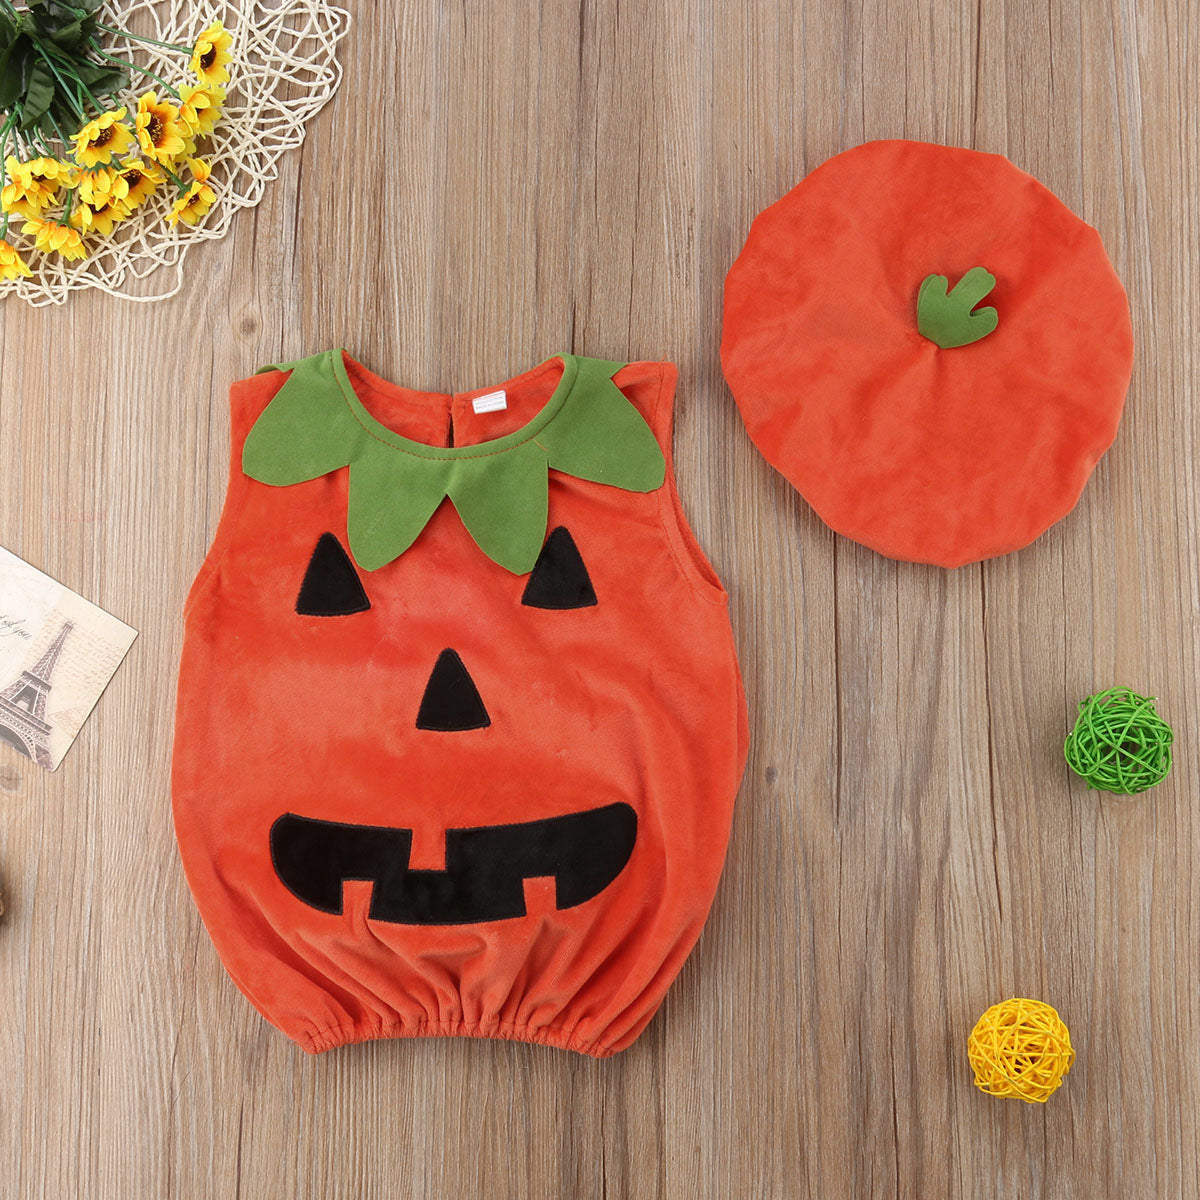 Baby Cosplay Pumpkin Costume Outfit-136